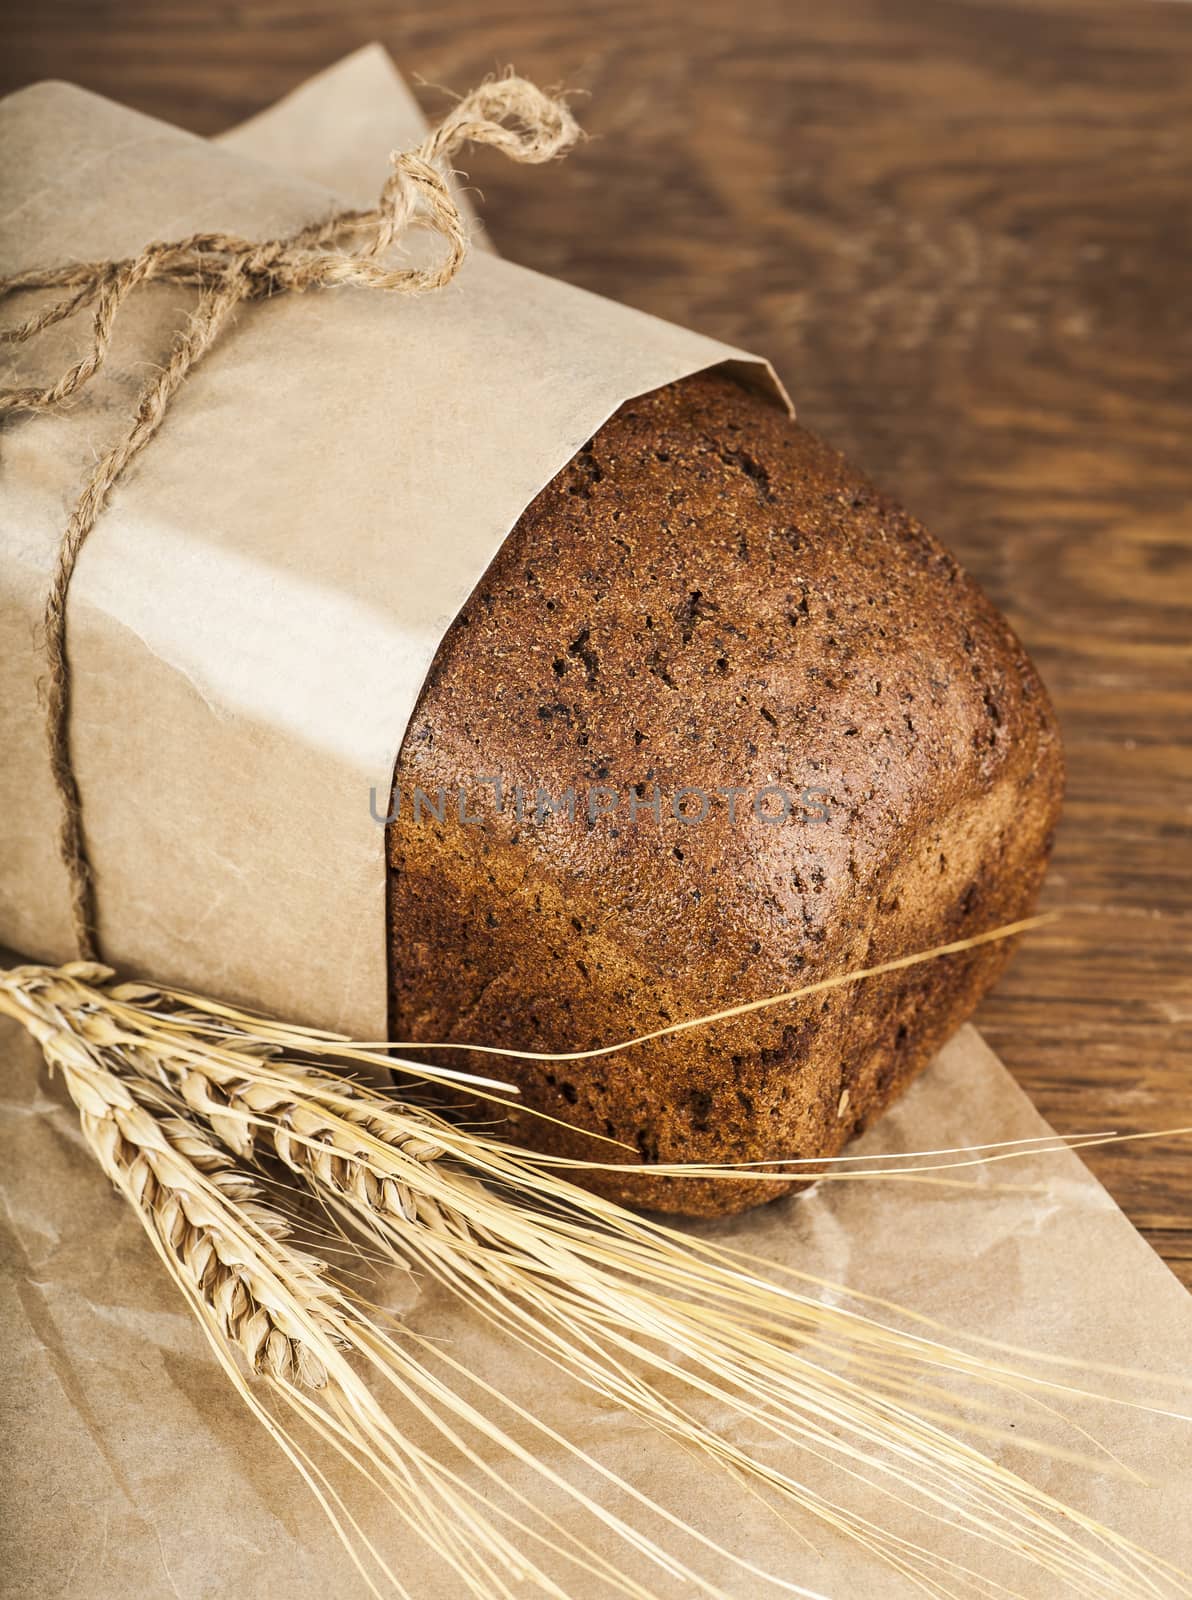 black bread in a paper packing with ears of wheat on the wooden background